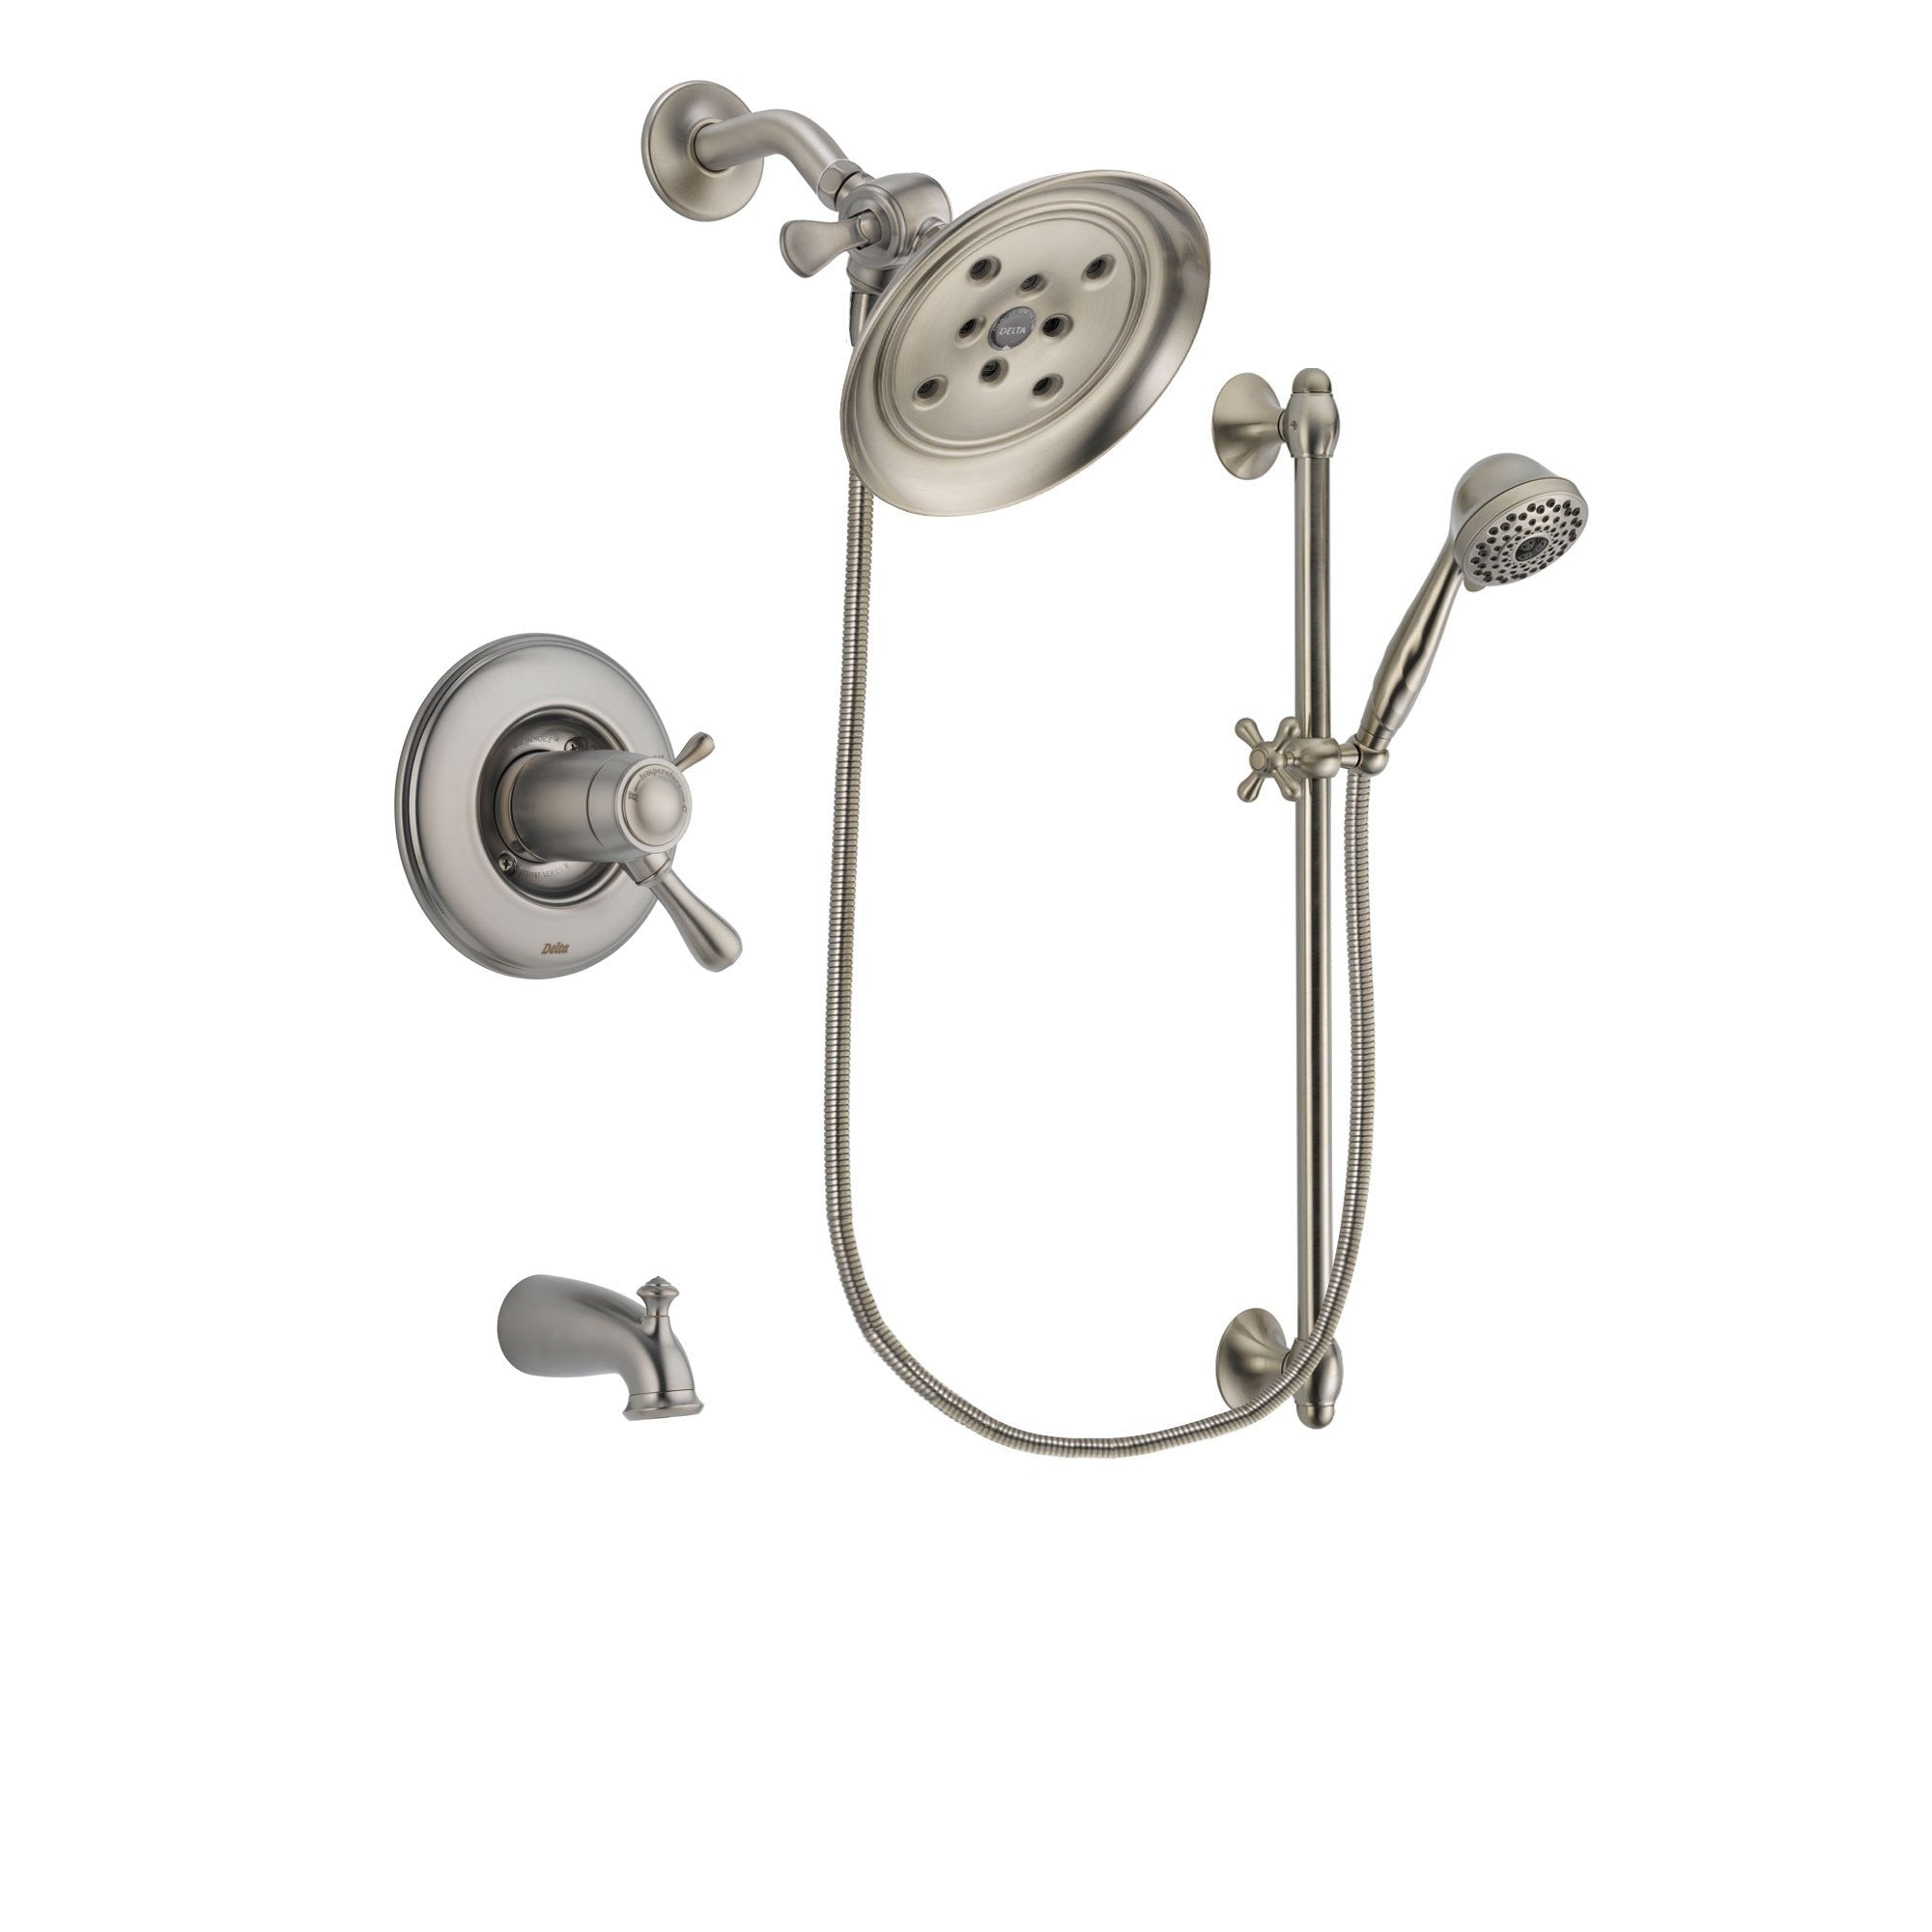 Delta Leland Stainless Steel Finish Thermostatic Tub and Shower Faucet System Package with Large Rain Showerhead and 7-Spray Handheld Shower with Slide Bar Includes Rough-in Valve and Tub Spout DSP1721V